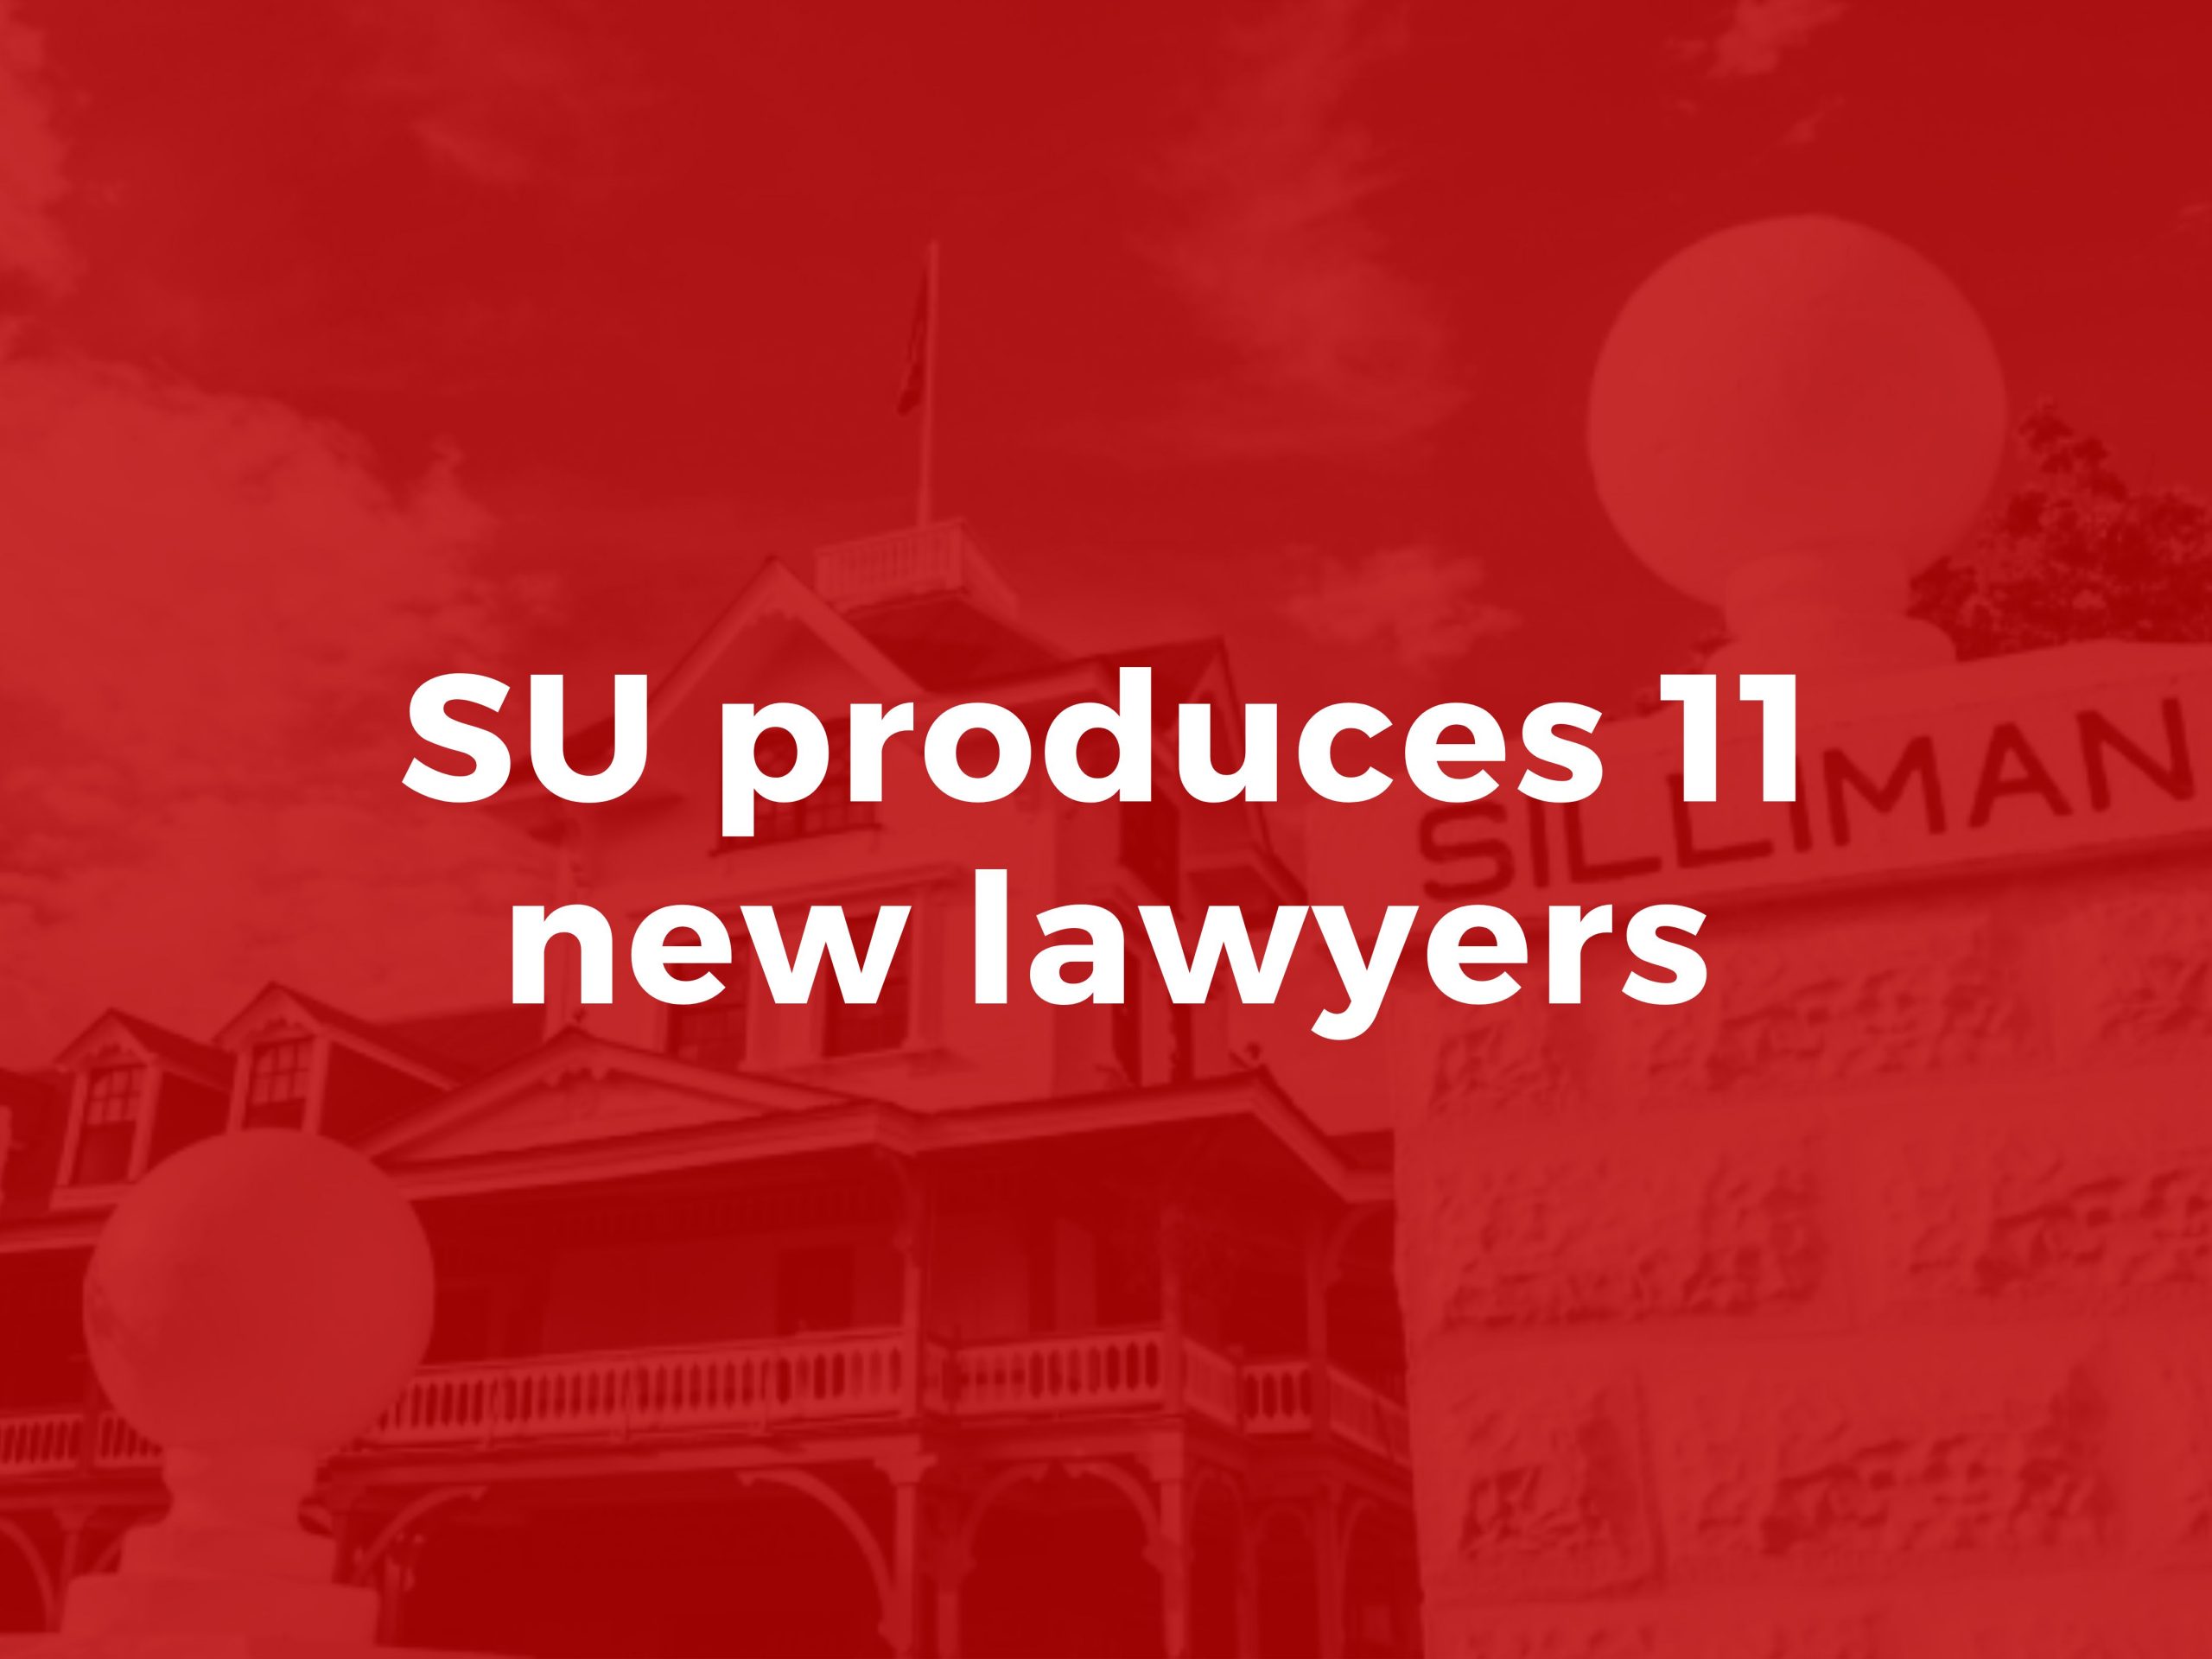 SU produces 11 new lawyers